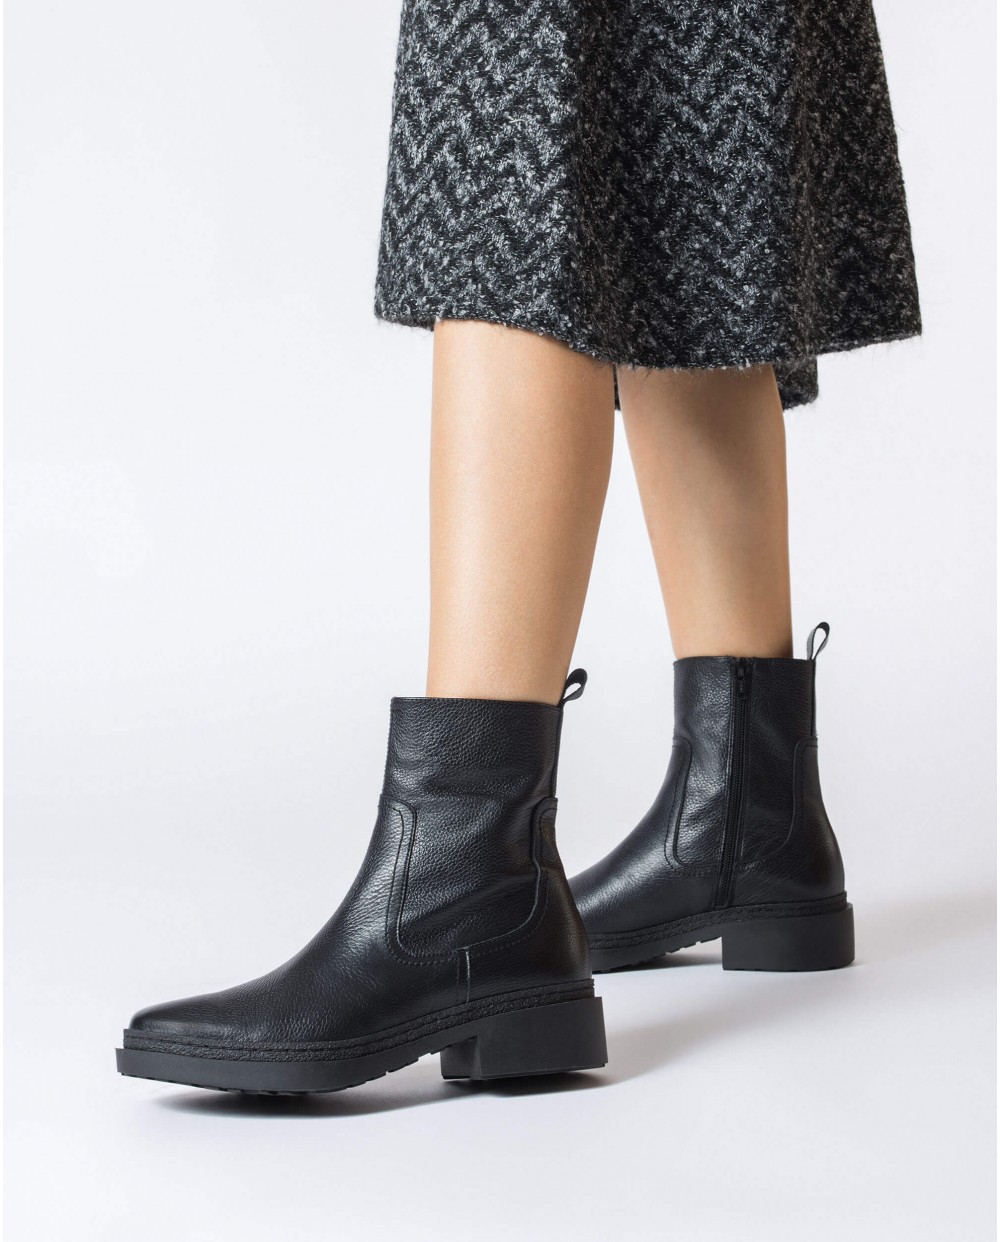 Wonders-Ankle Boots-Black Bran Ankle boot